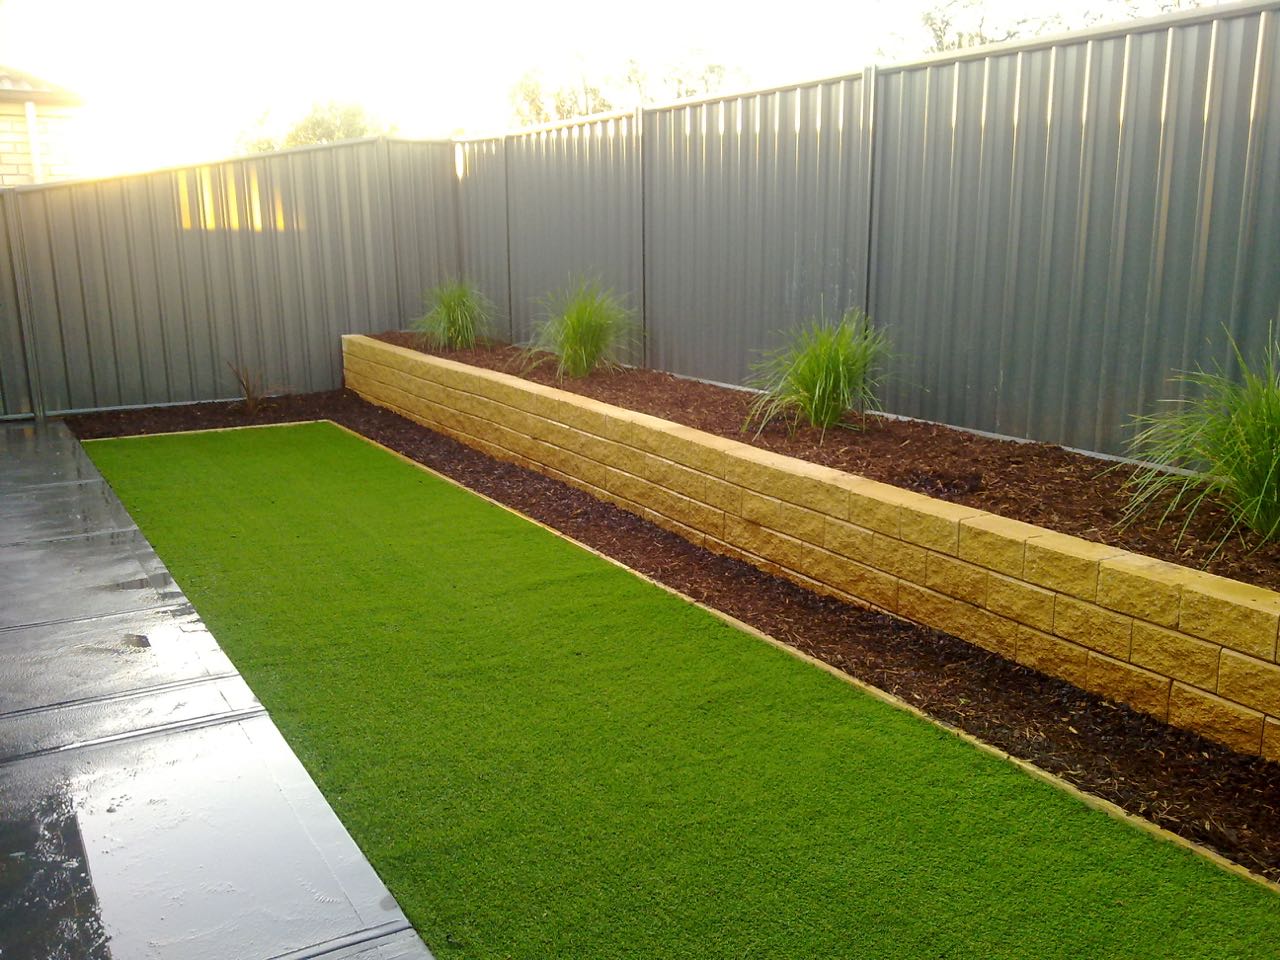 Retaining Wall With Garden Bed For Plants